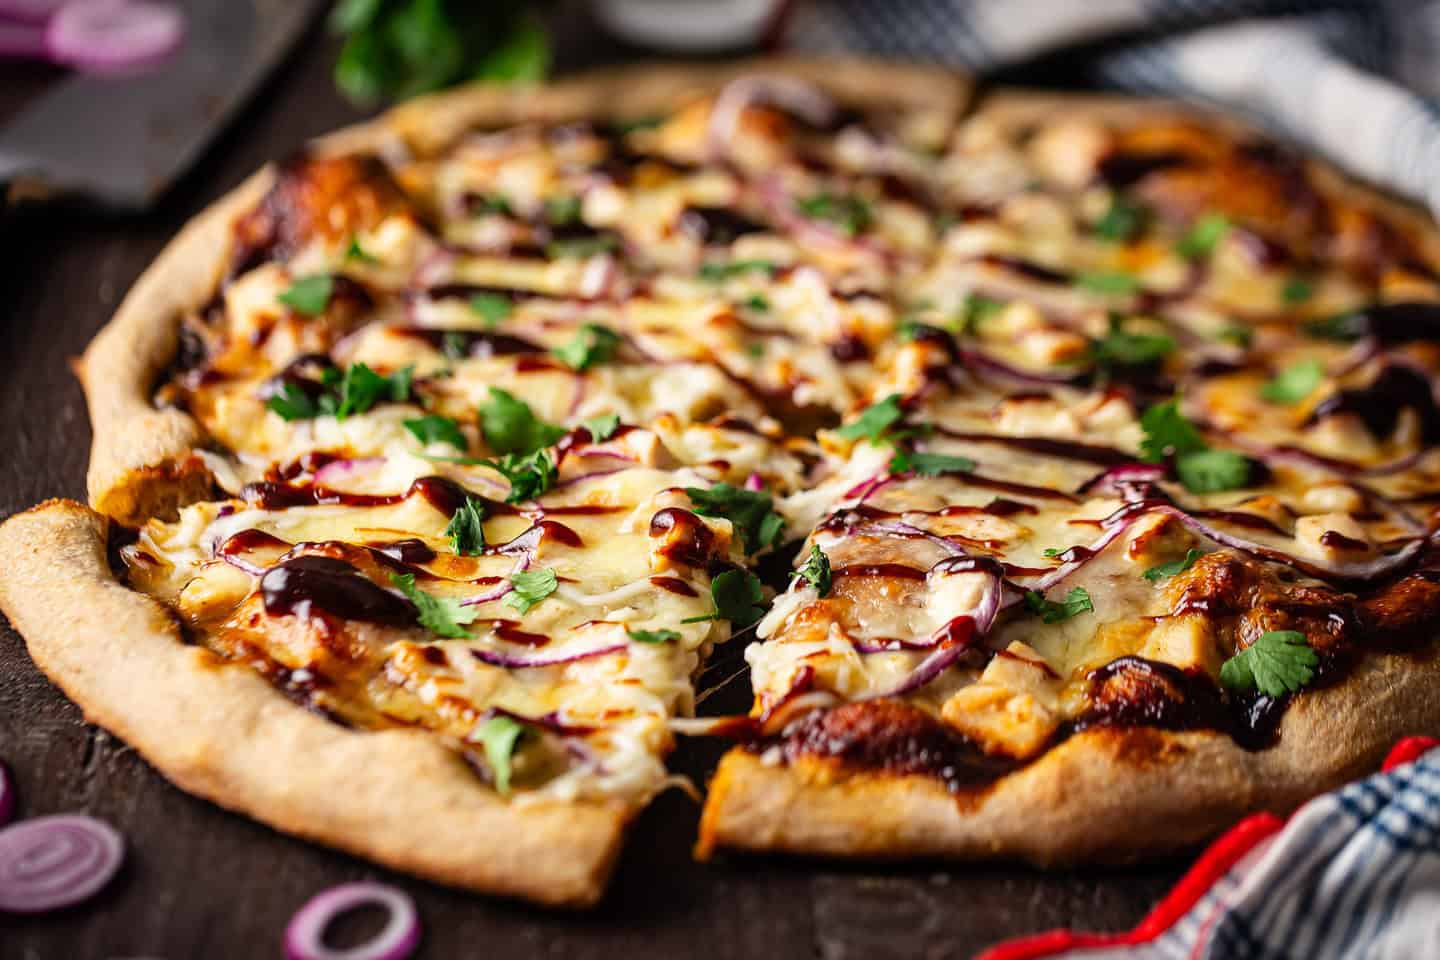 Chicken barbecue pizza recipe fresh from the oven with extra barbecue sauce drizzled on top.